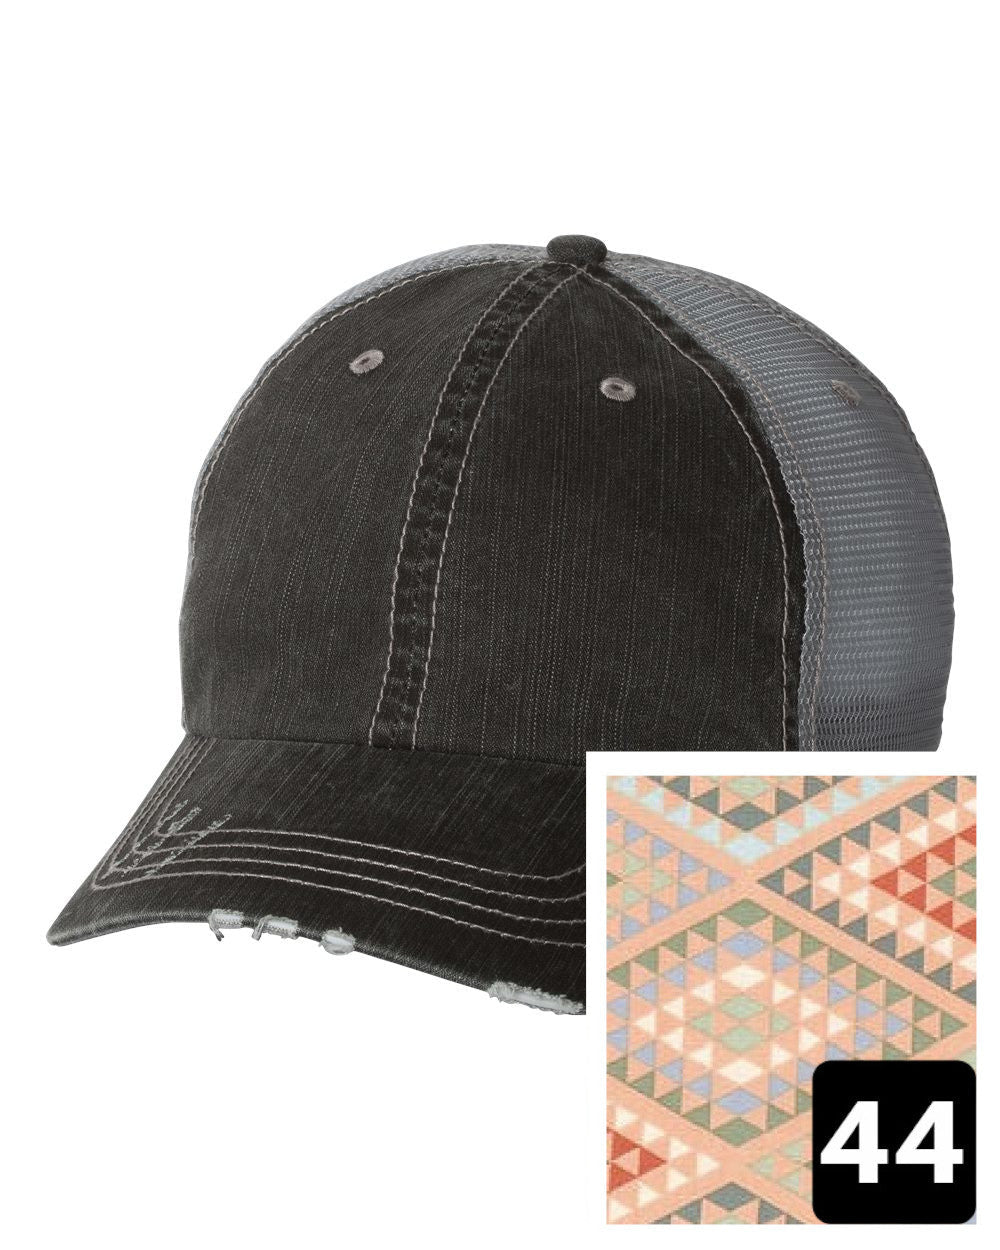 gray distressed trucker hat with navy coral and white chevron fabric state of New Hampshire